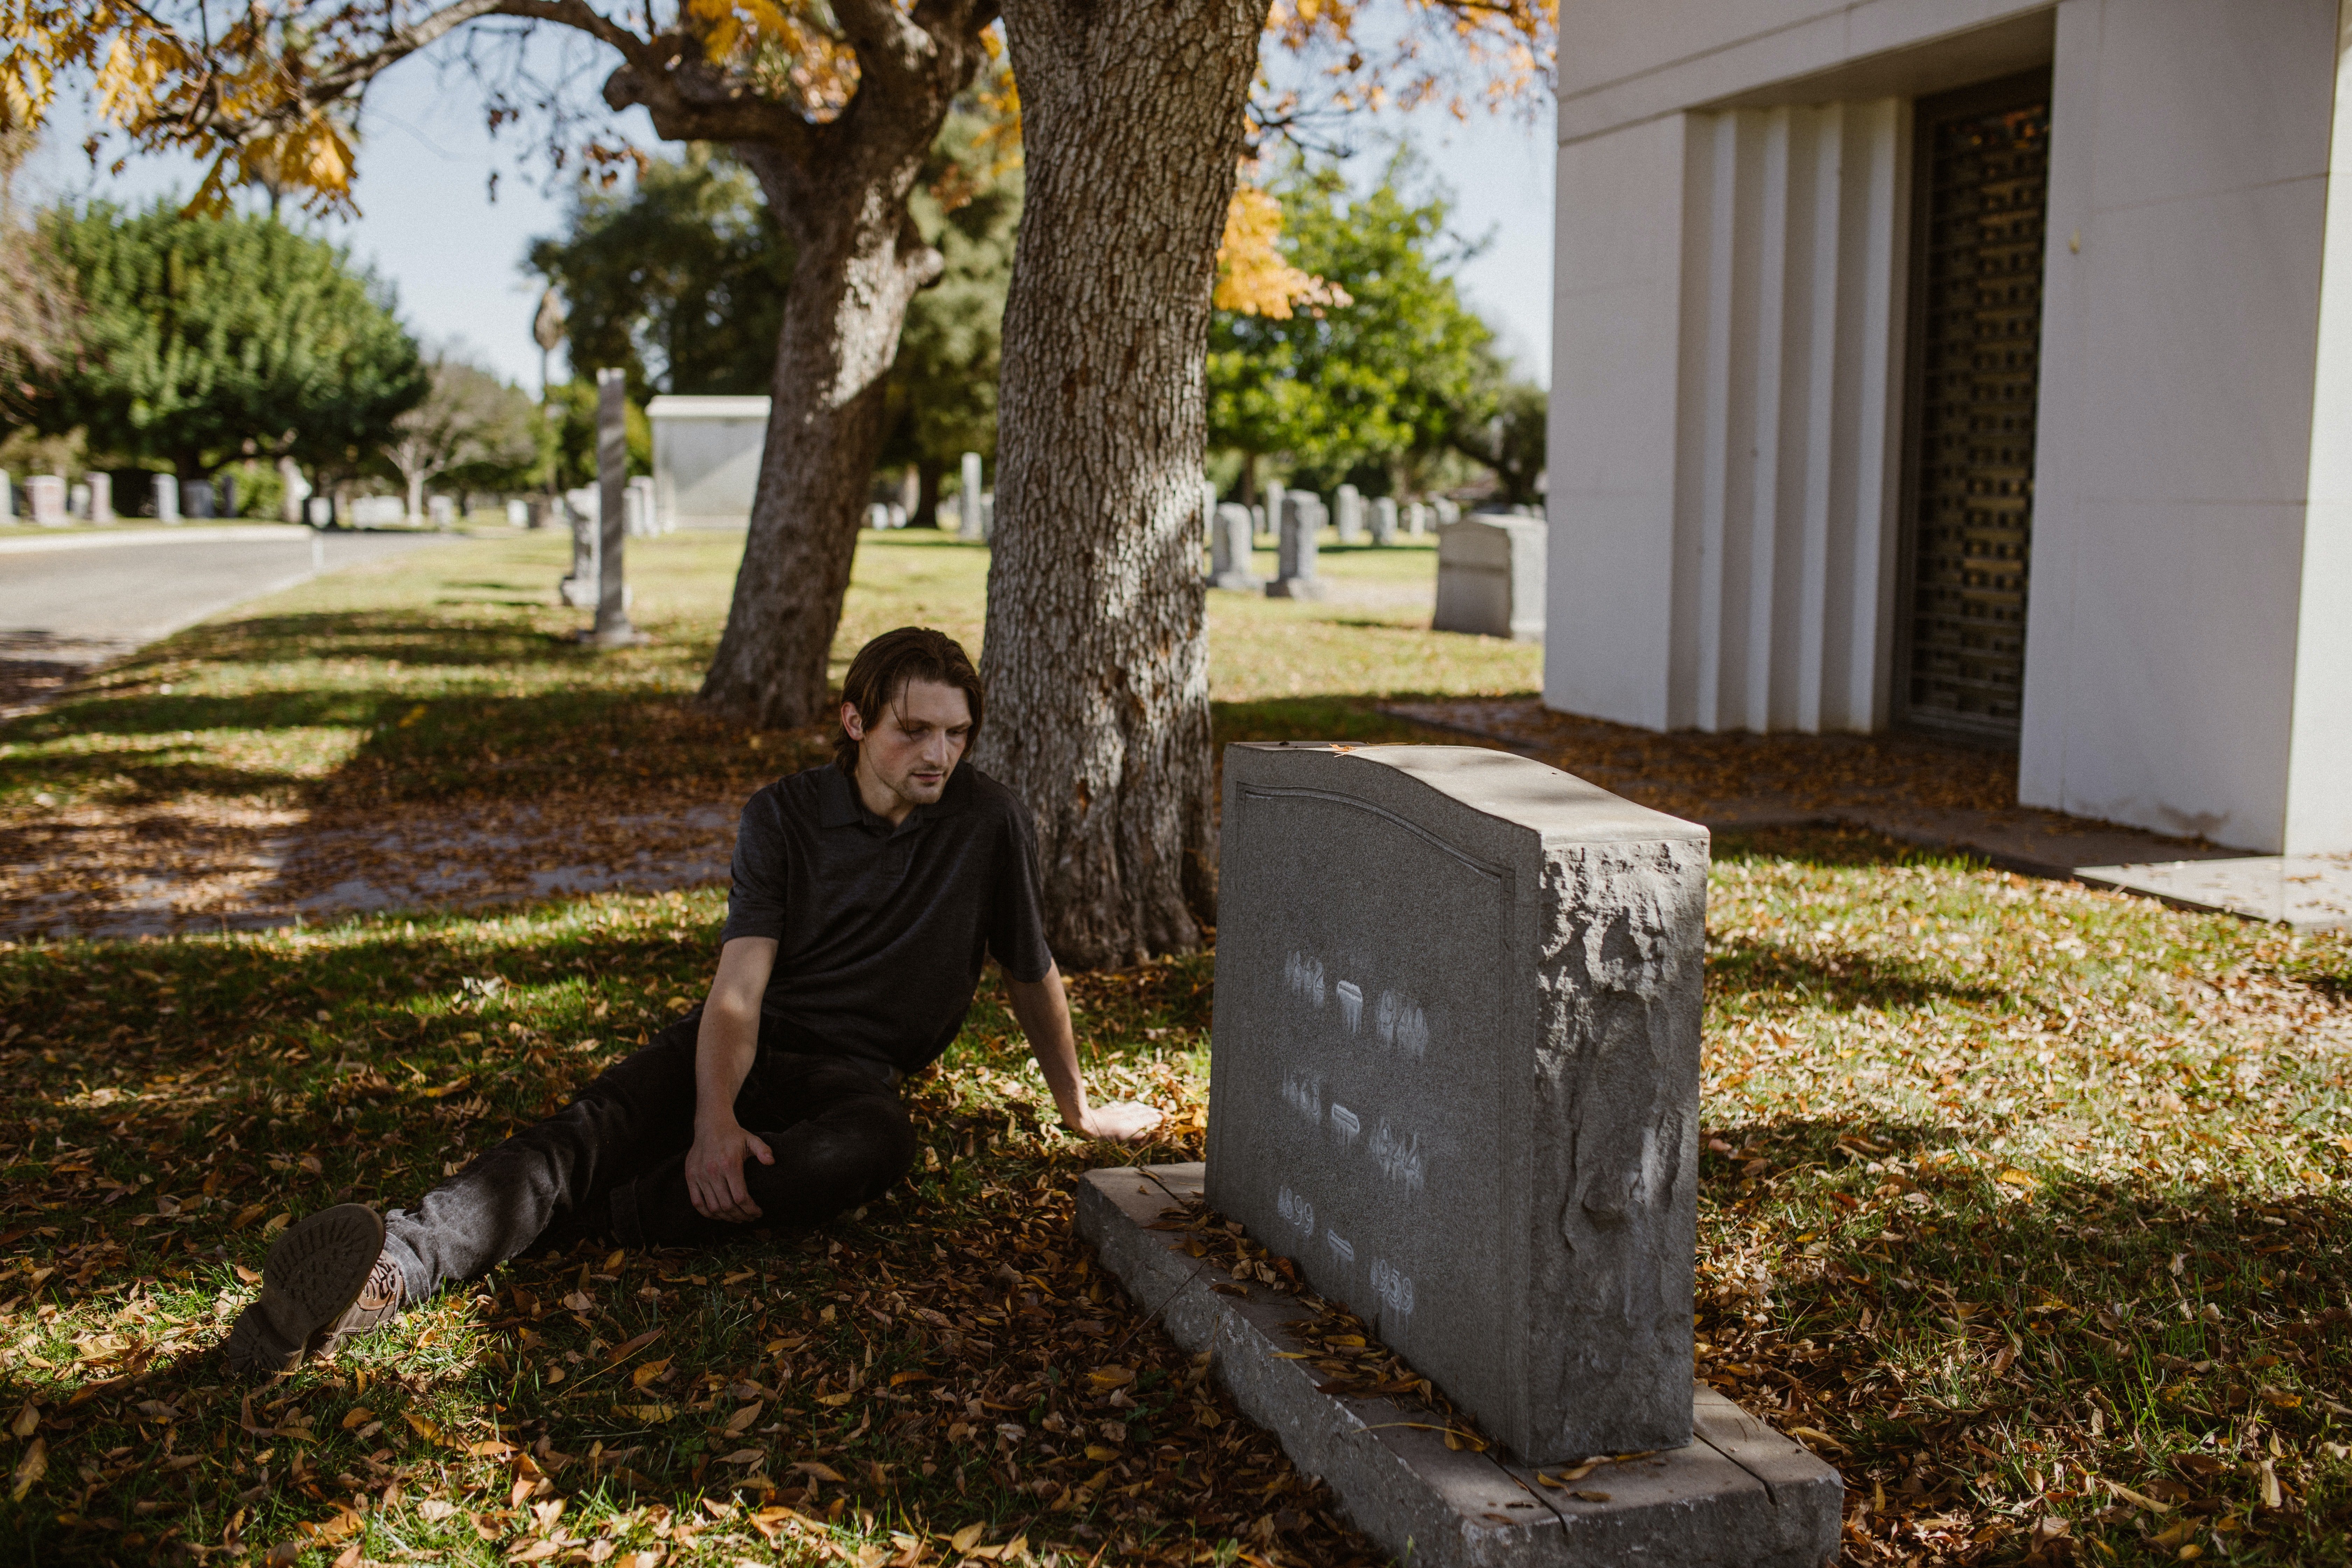 Mark was shocked to see the boys meet a man at the cemetery. | Source: Pexels